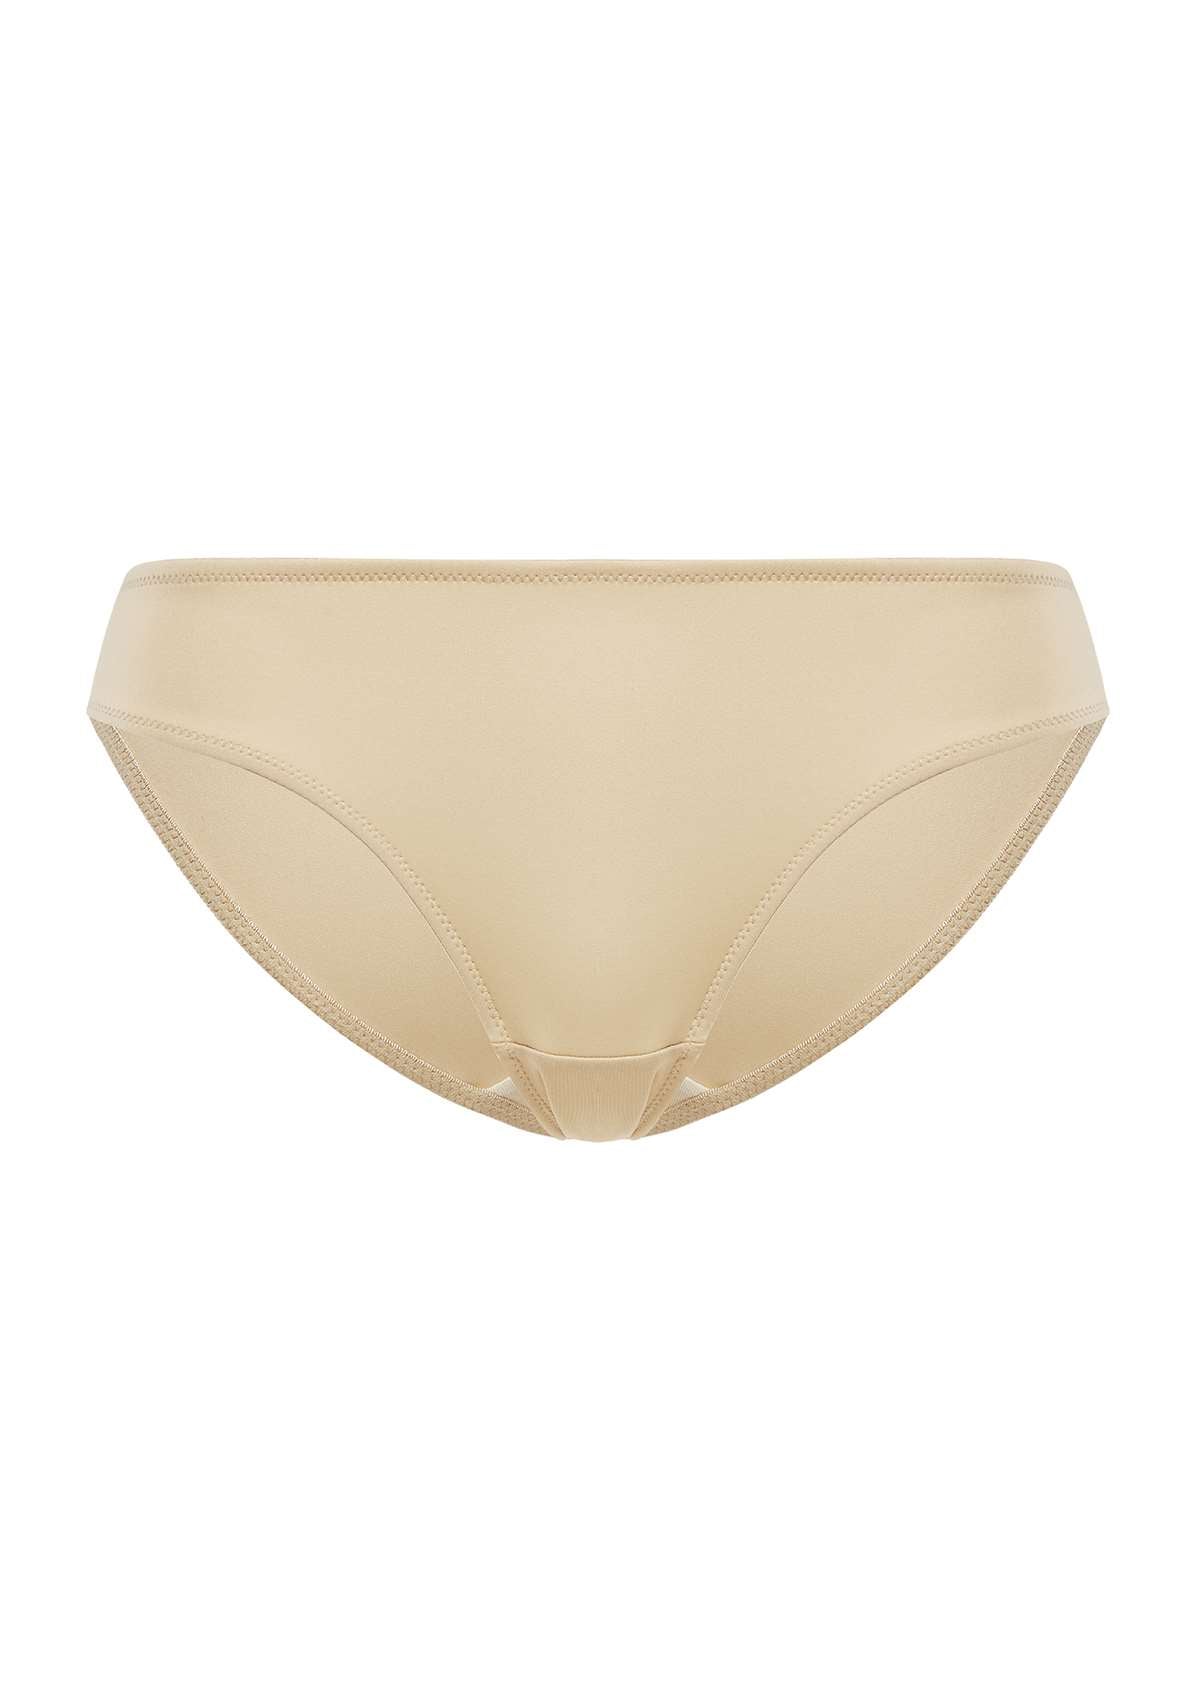 HSIA Patricia Smooth Classic Soft Stretch Panty - Everyday Comfort - L / Beige